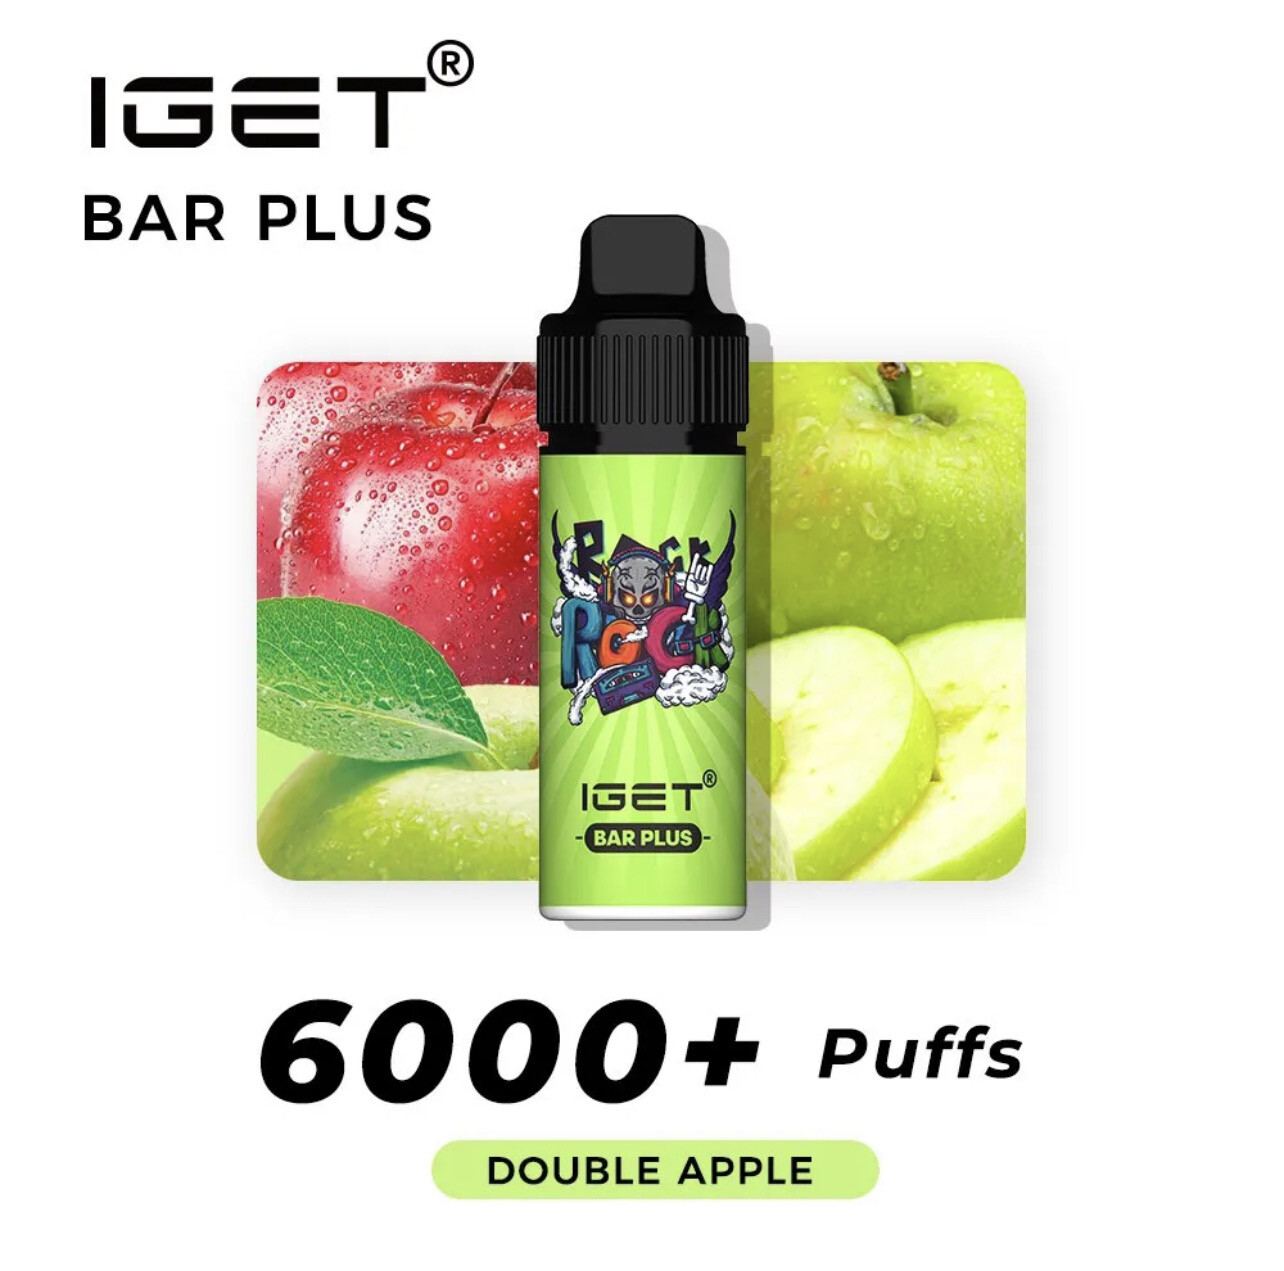 IGET BAR PLUS DOUBLE APPLE 6000 PUFFS